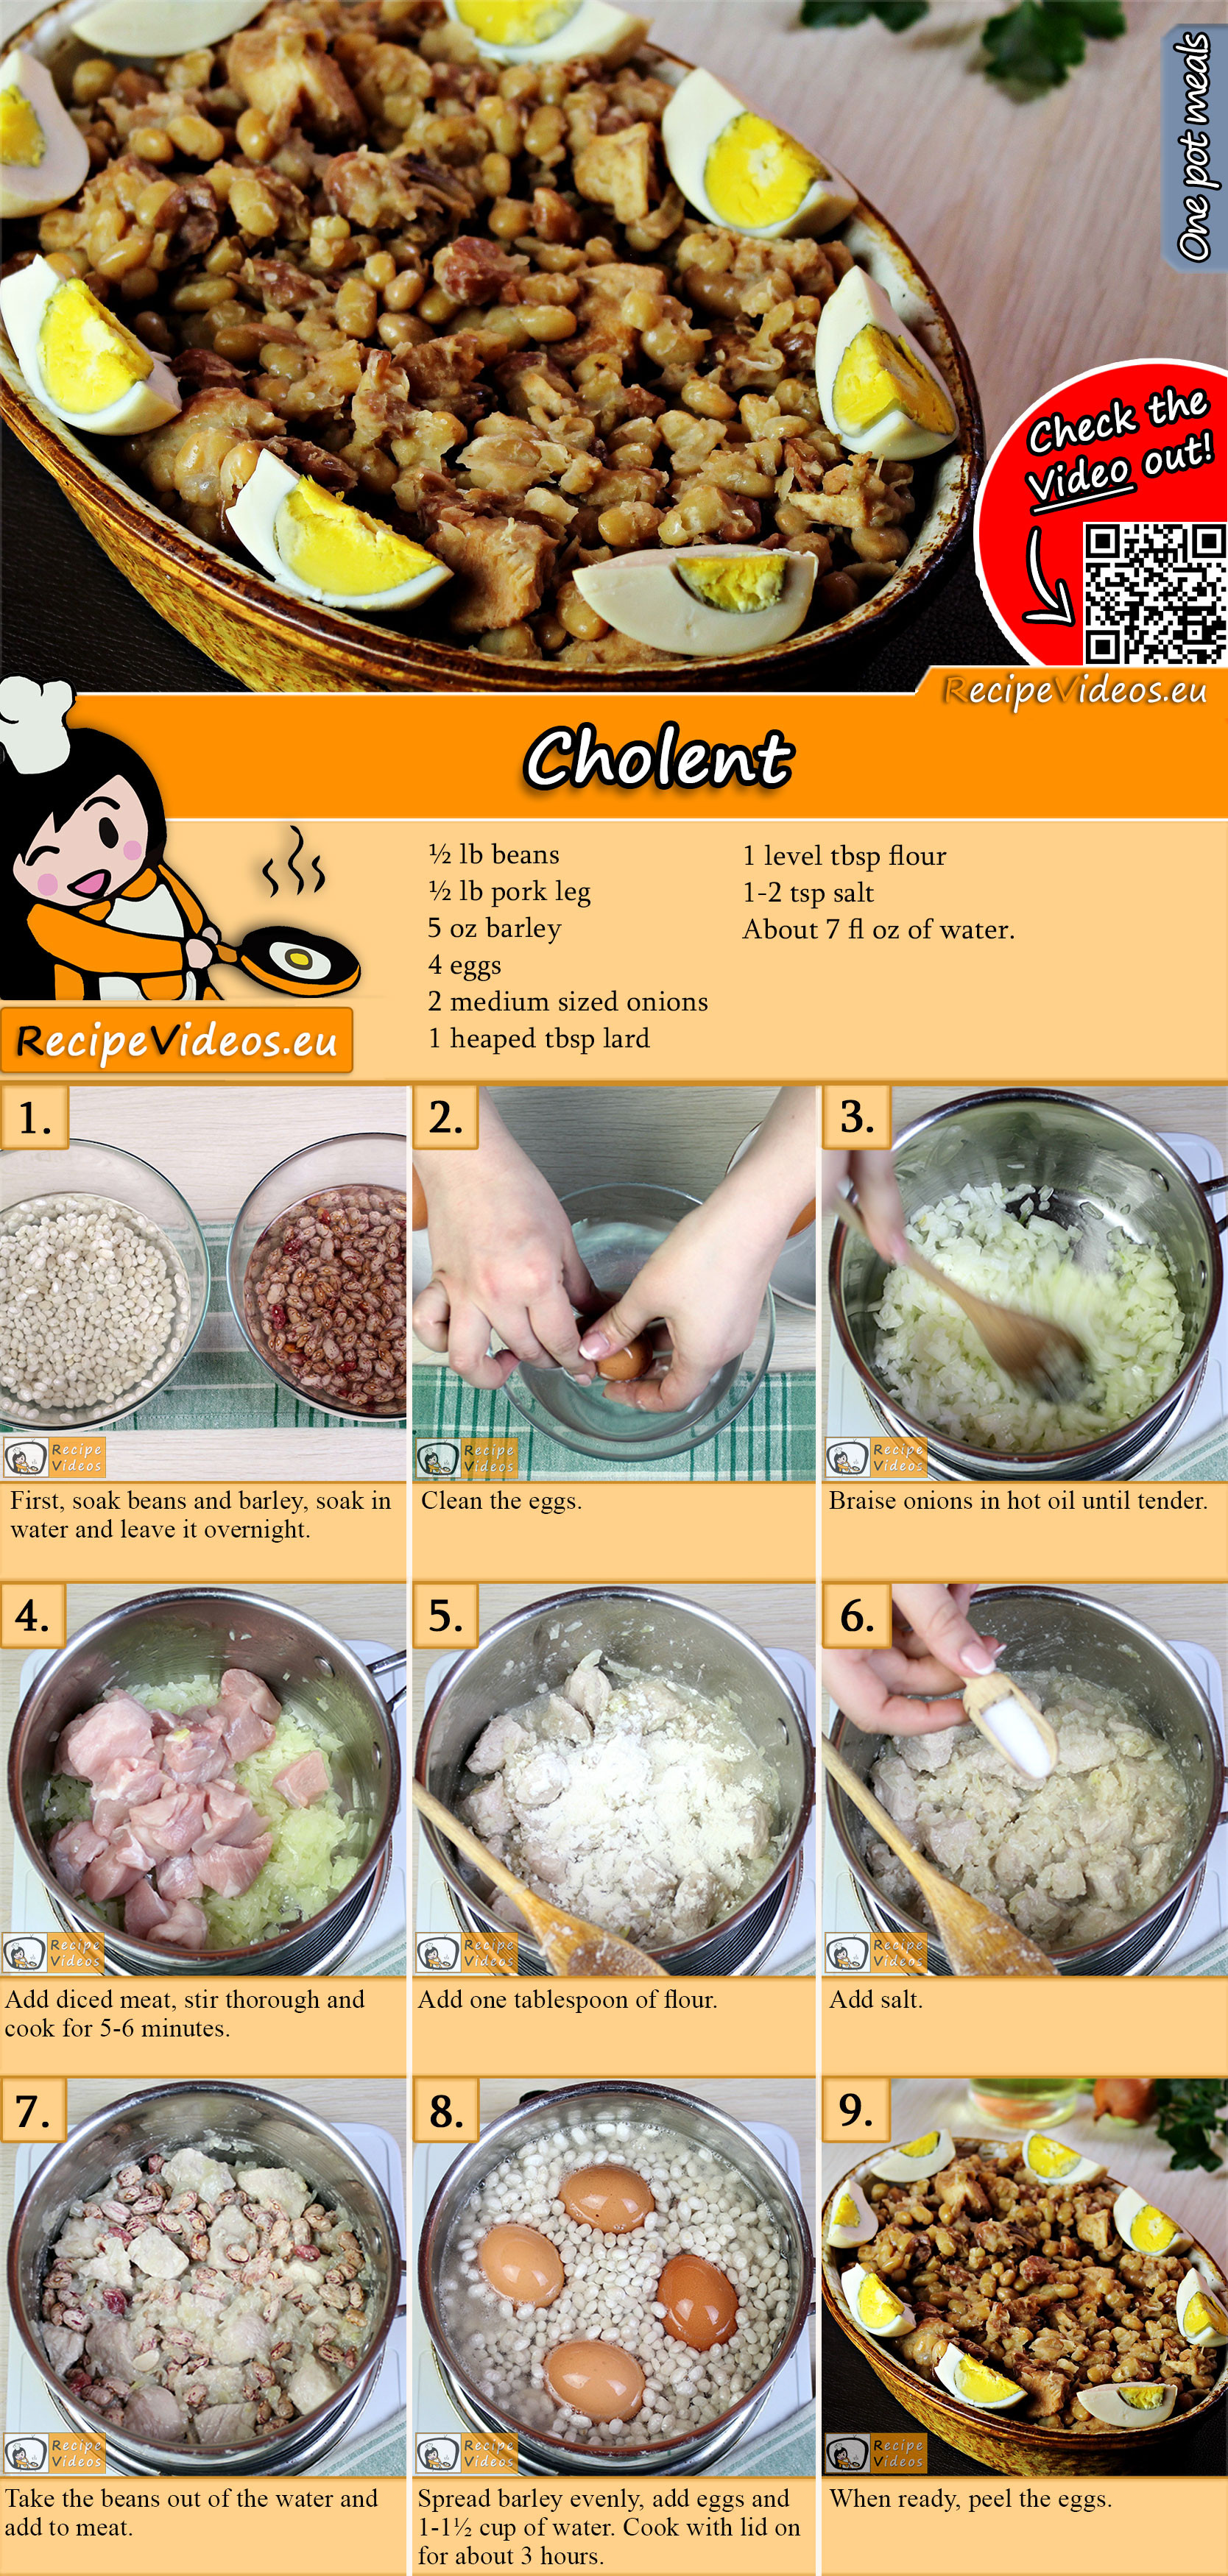 Cholent recipe with video